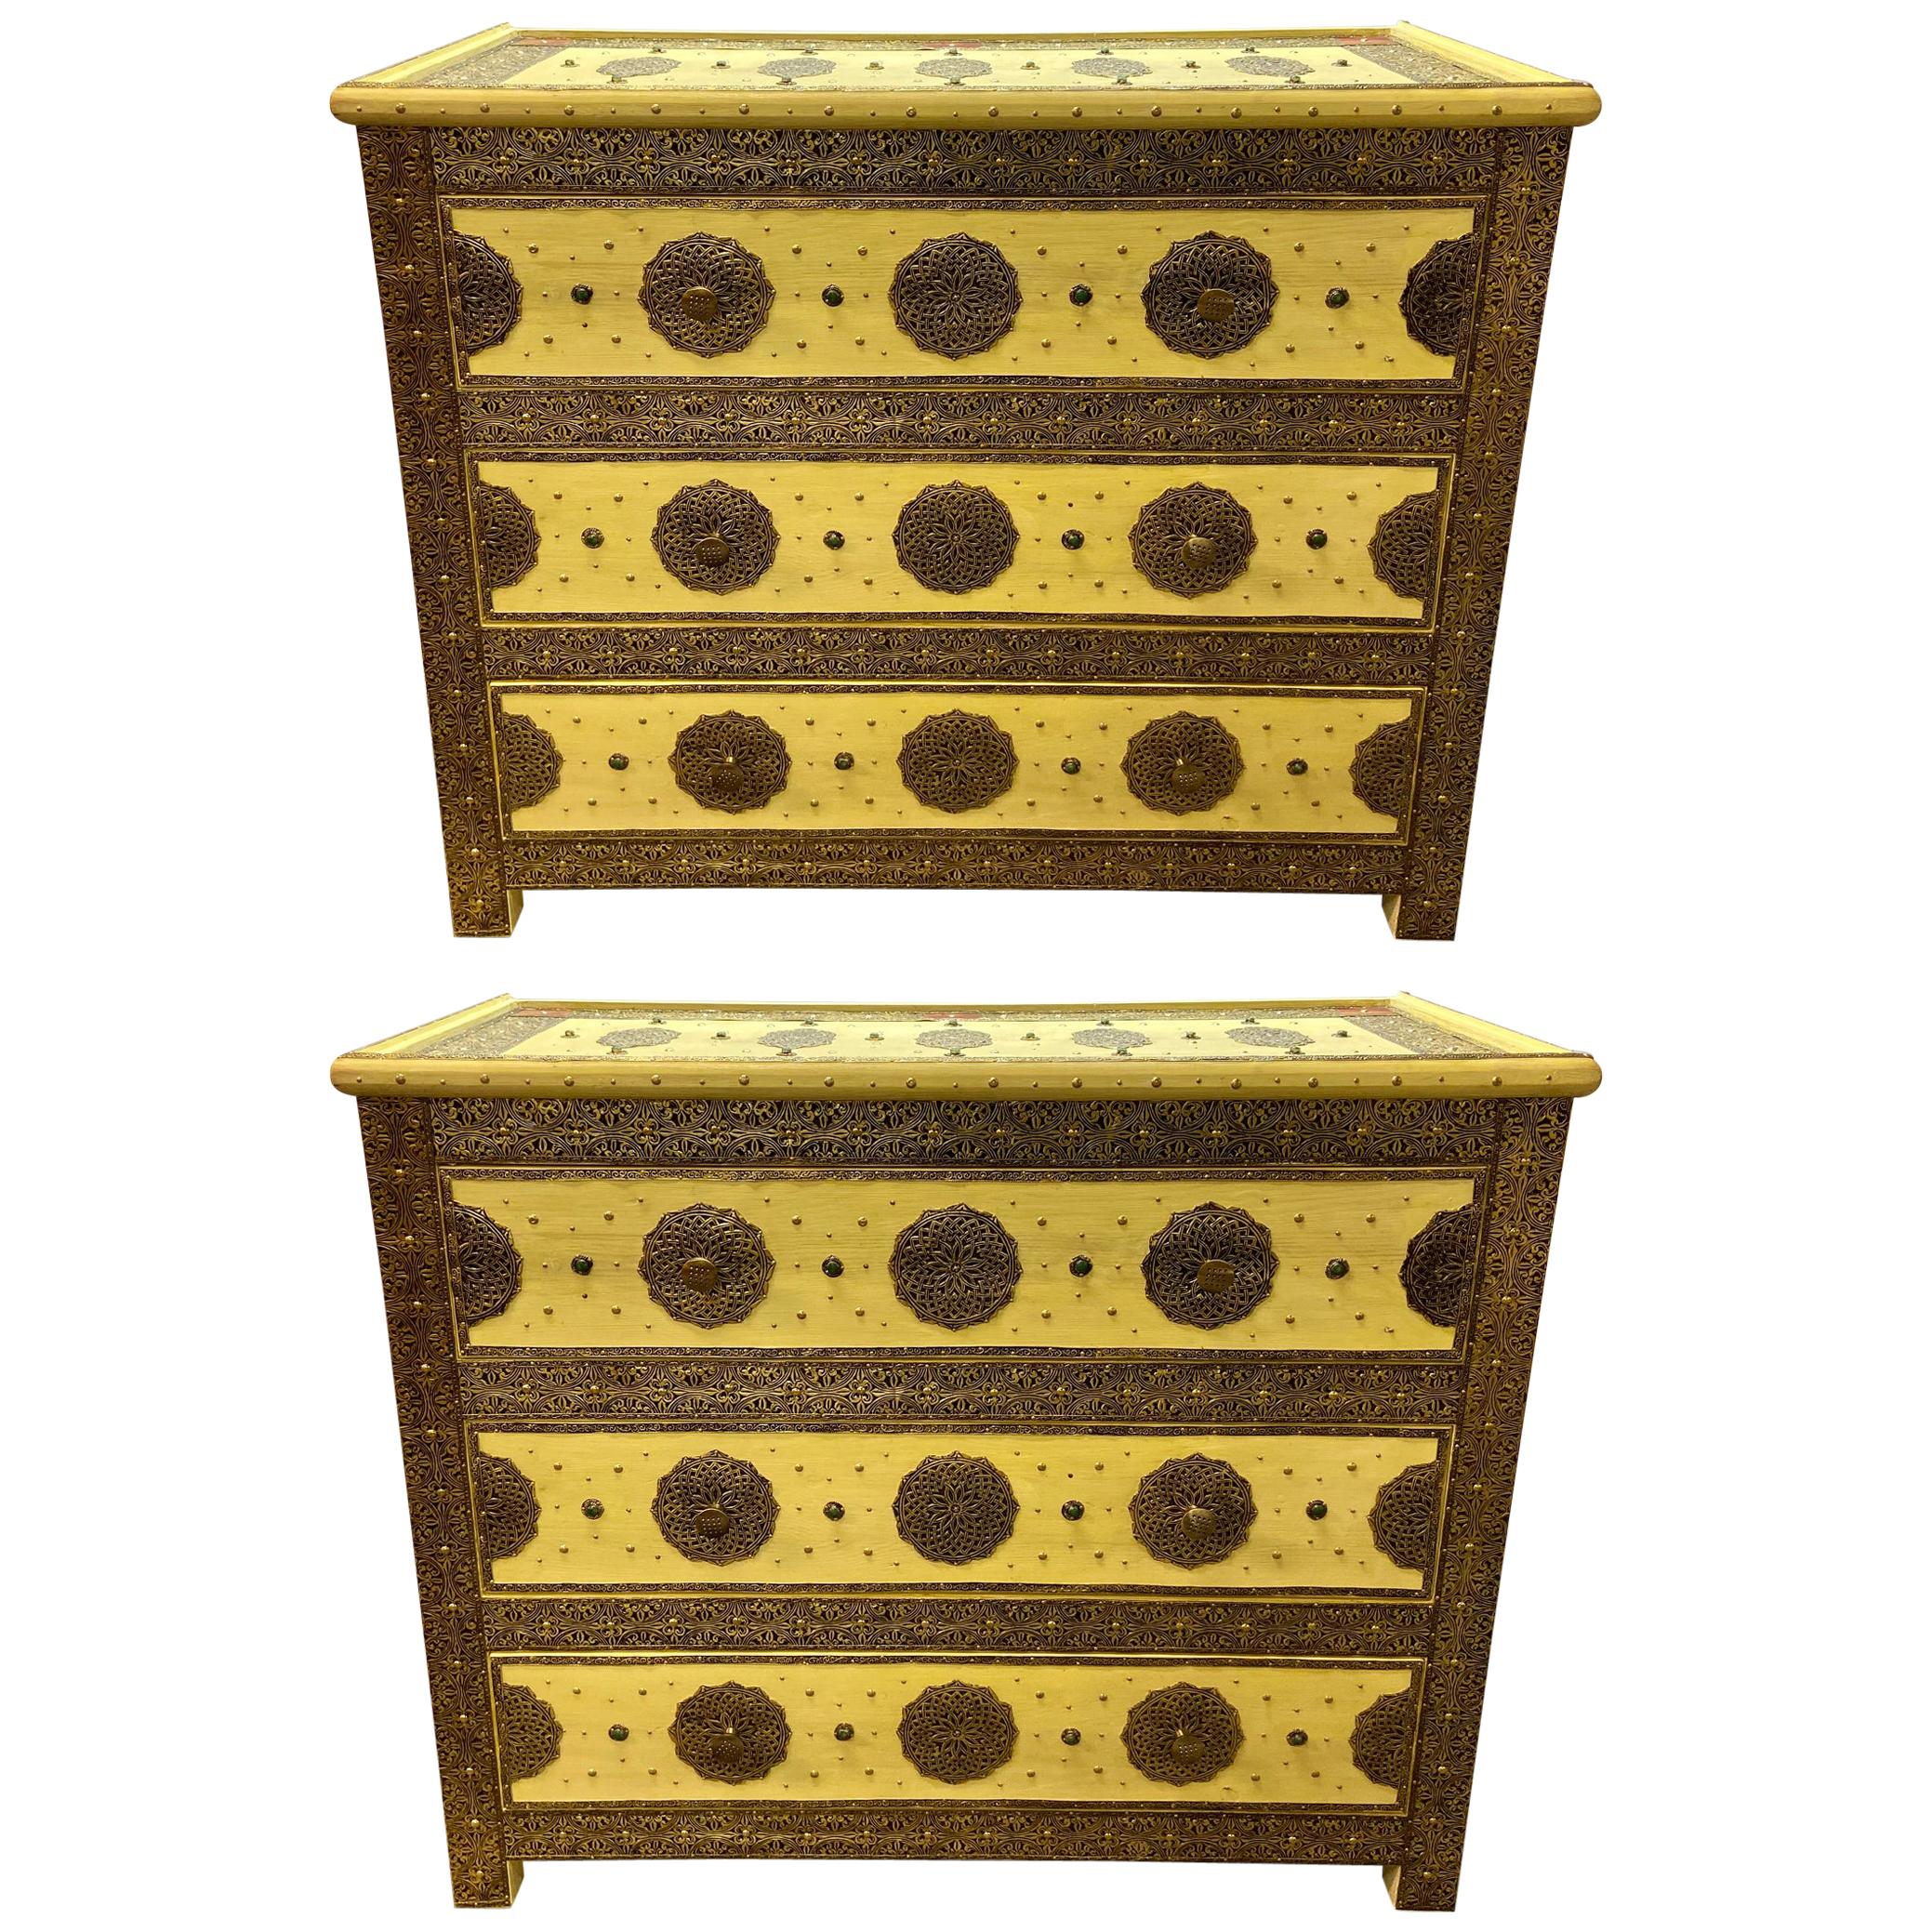 Three-Drawer Commodes, Chests or Nightstands in Hollywood Regency Style, a Pair 